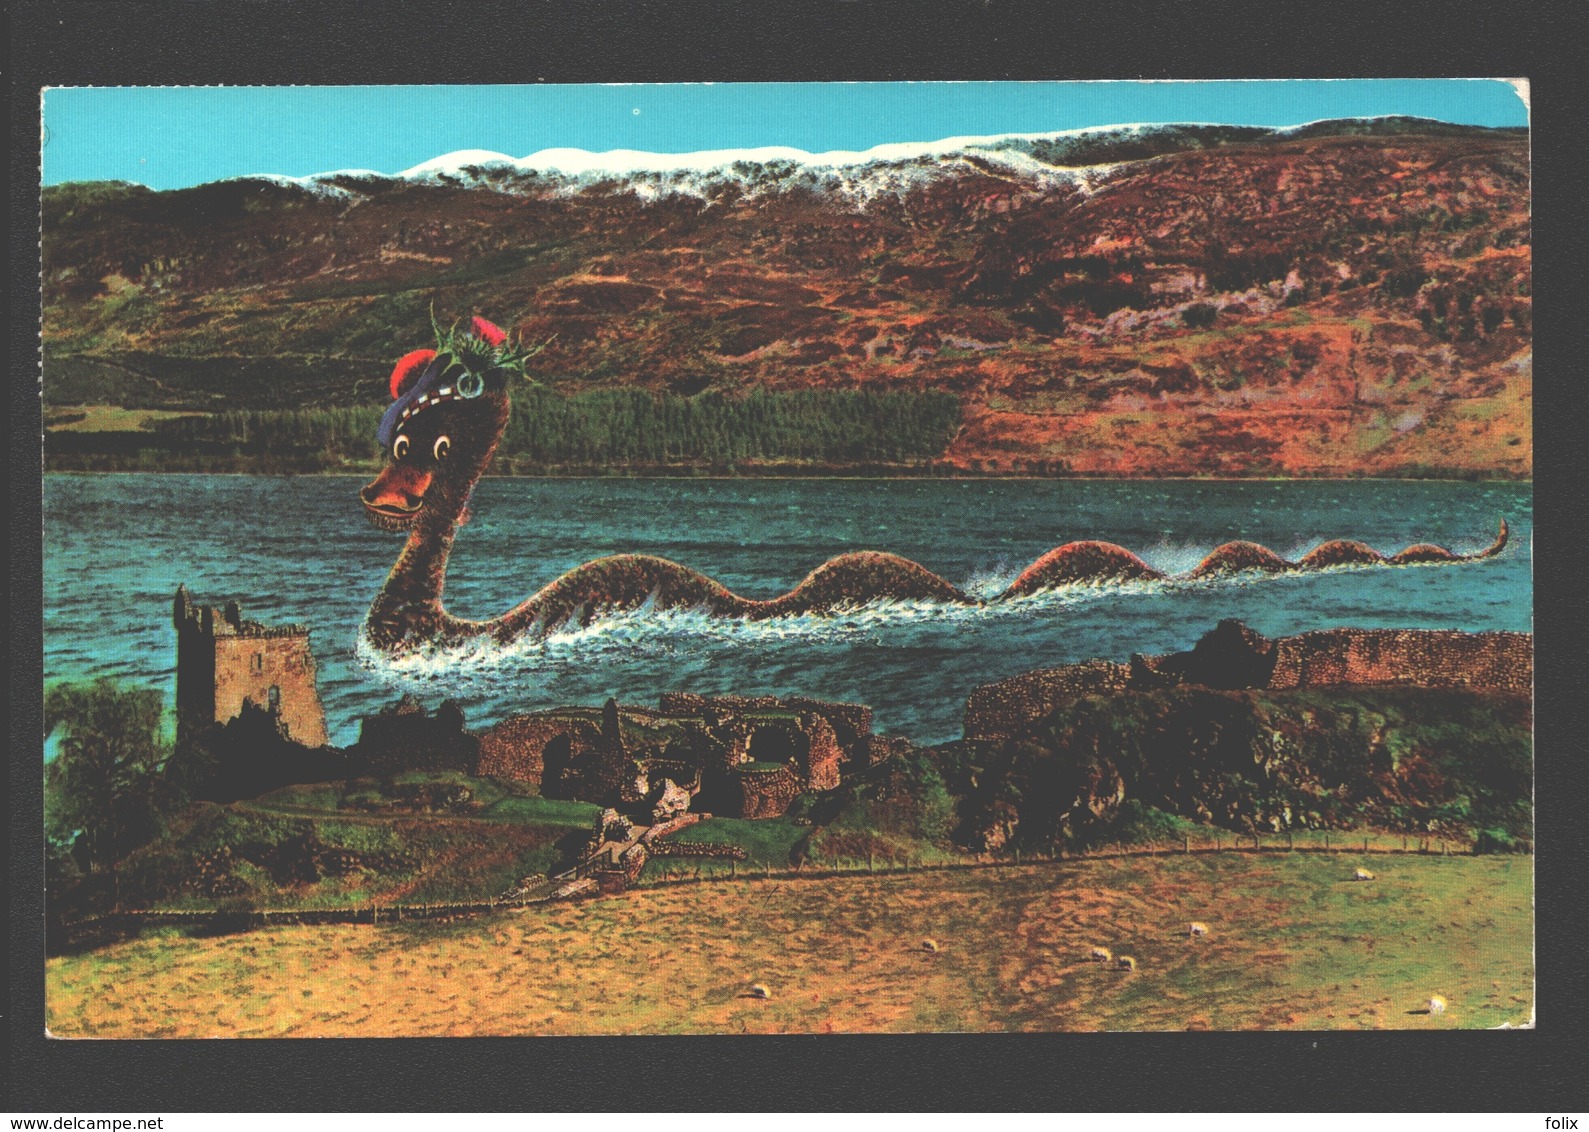 Loch Ness Monster At Castle Urquhart - Inverness-shire